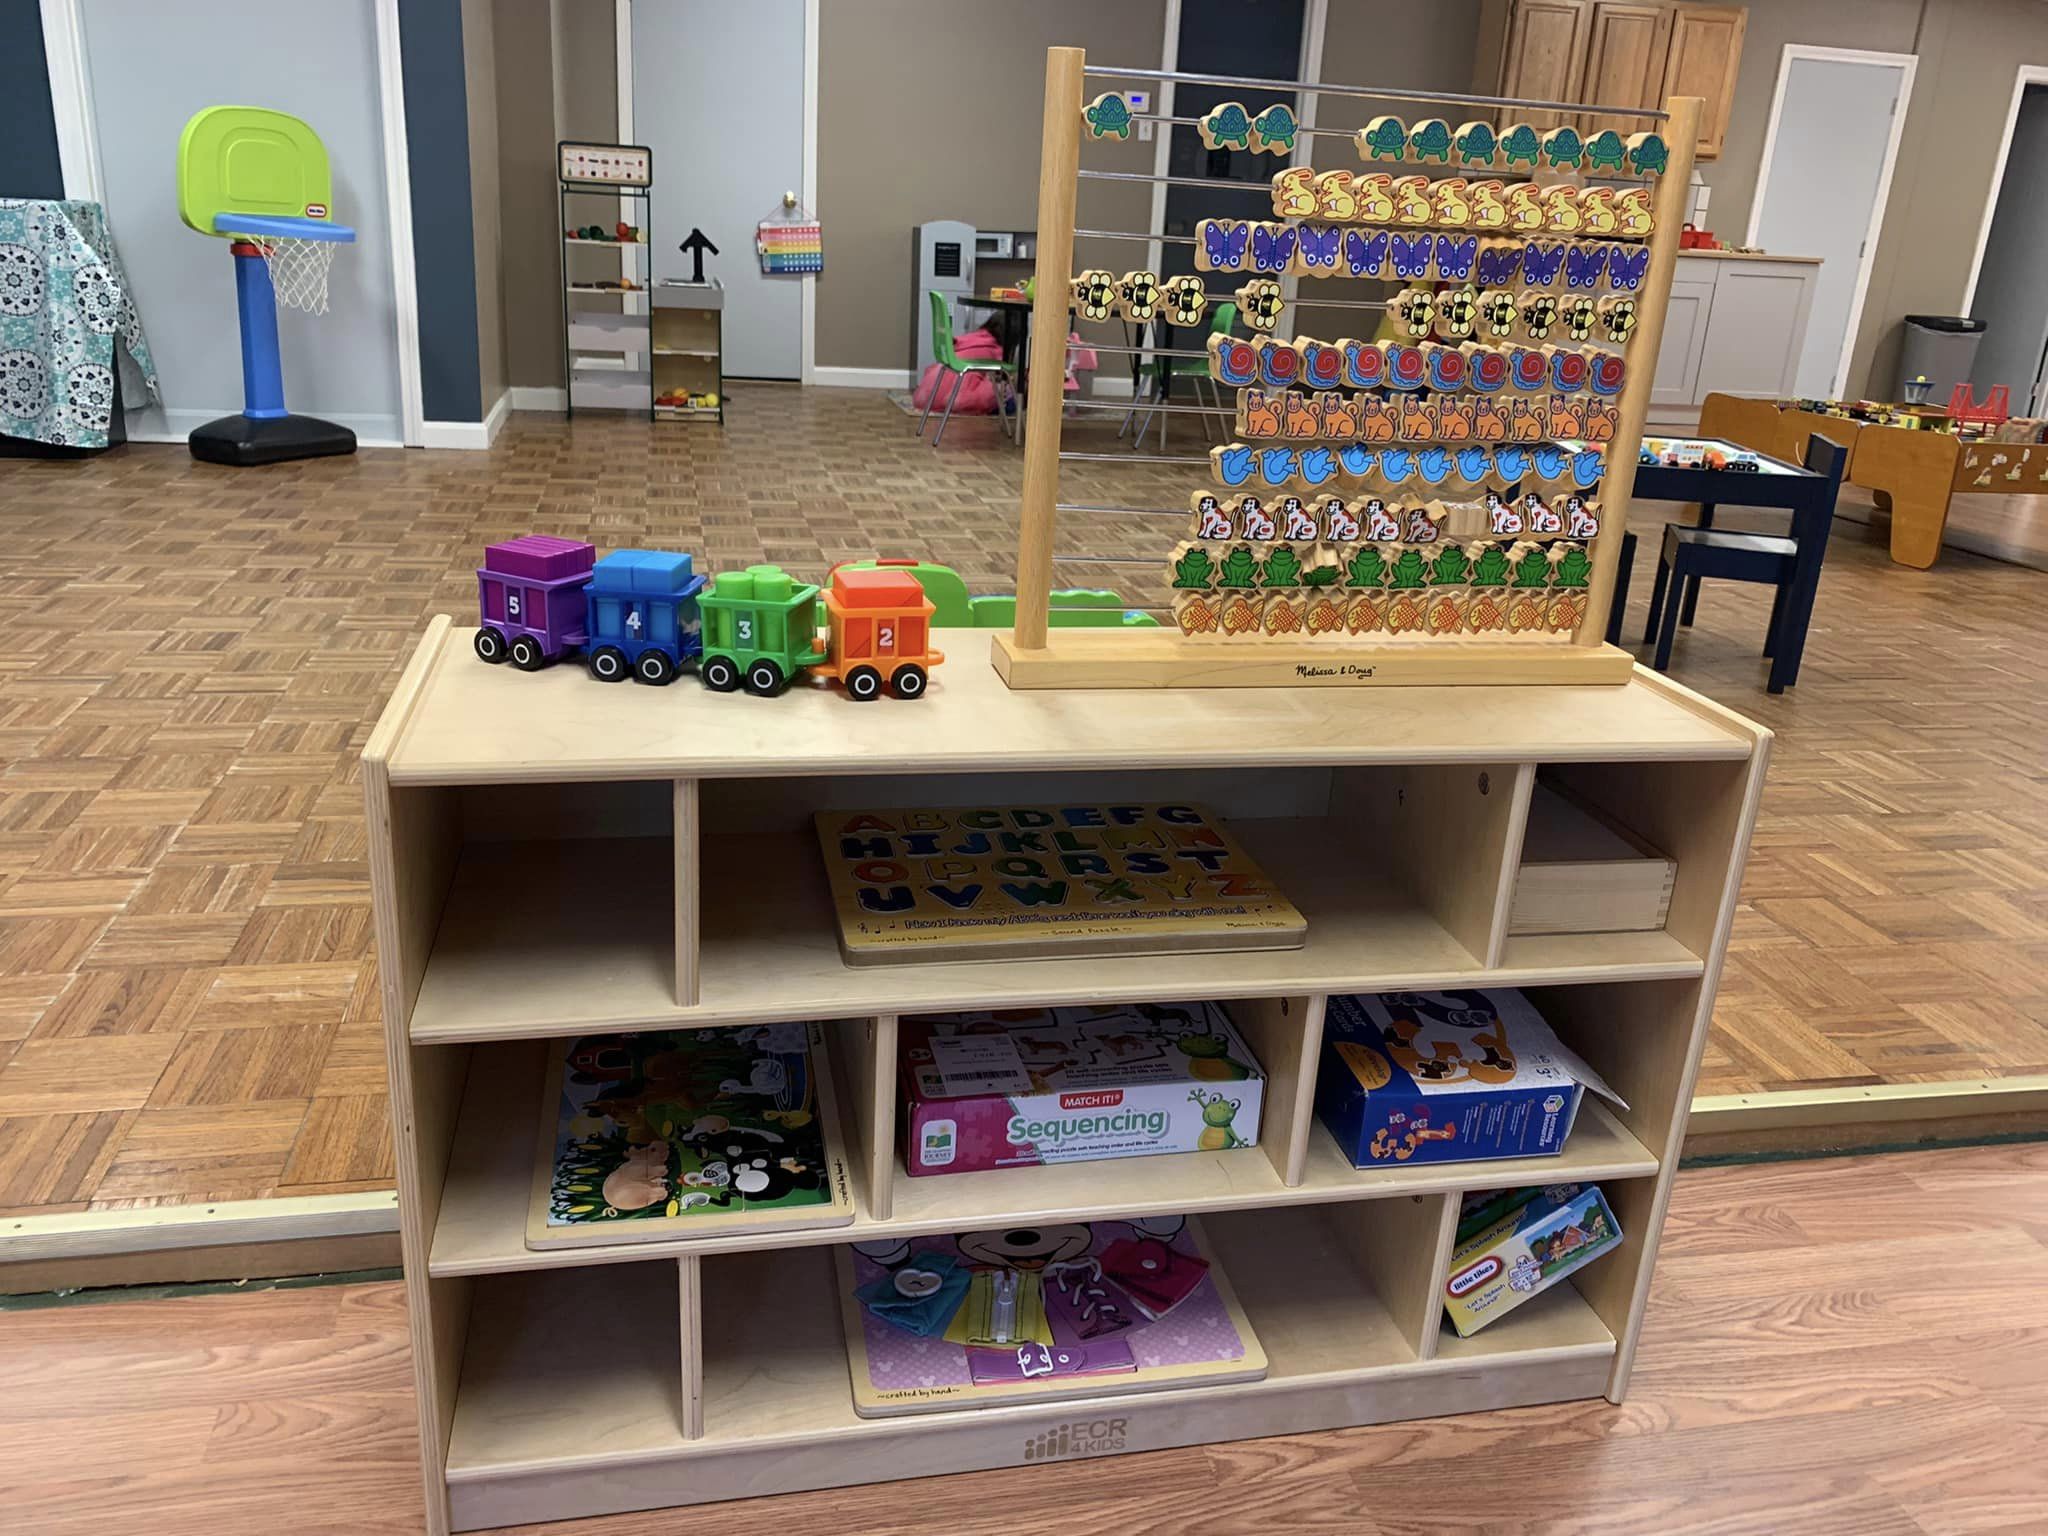 Inside classroom - The Growing Patch Childcare LLC - Weare, NH